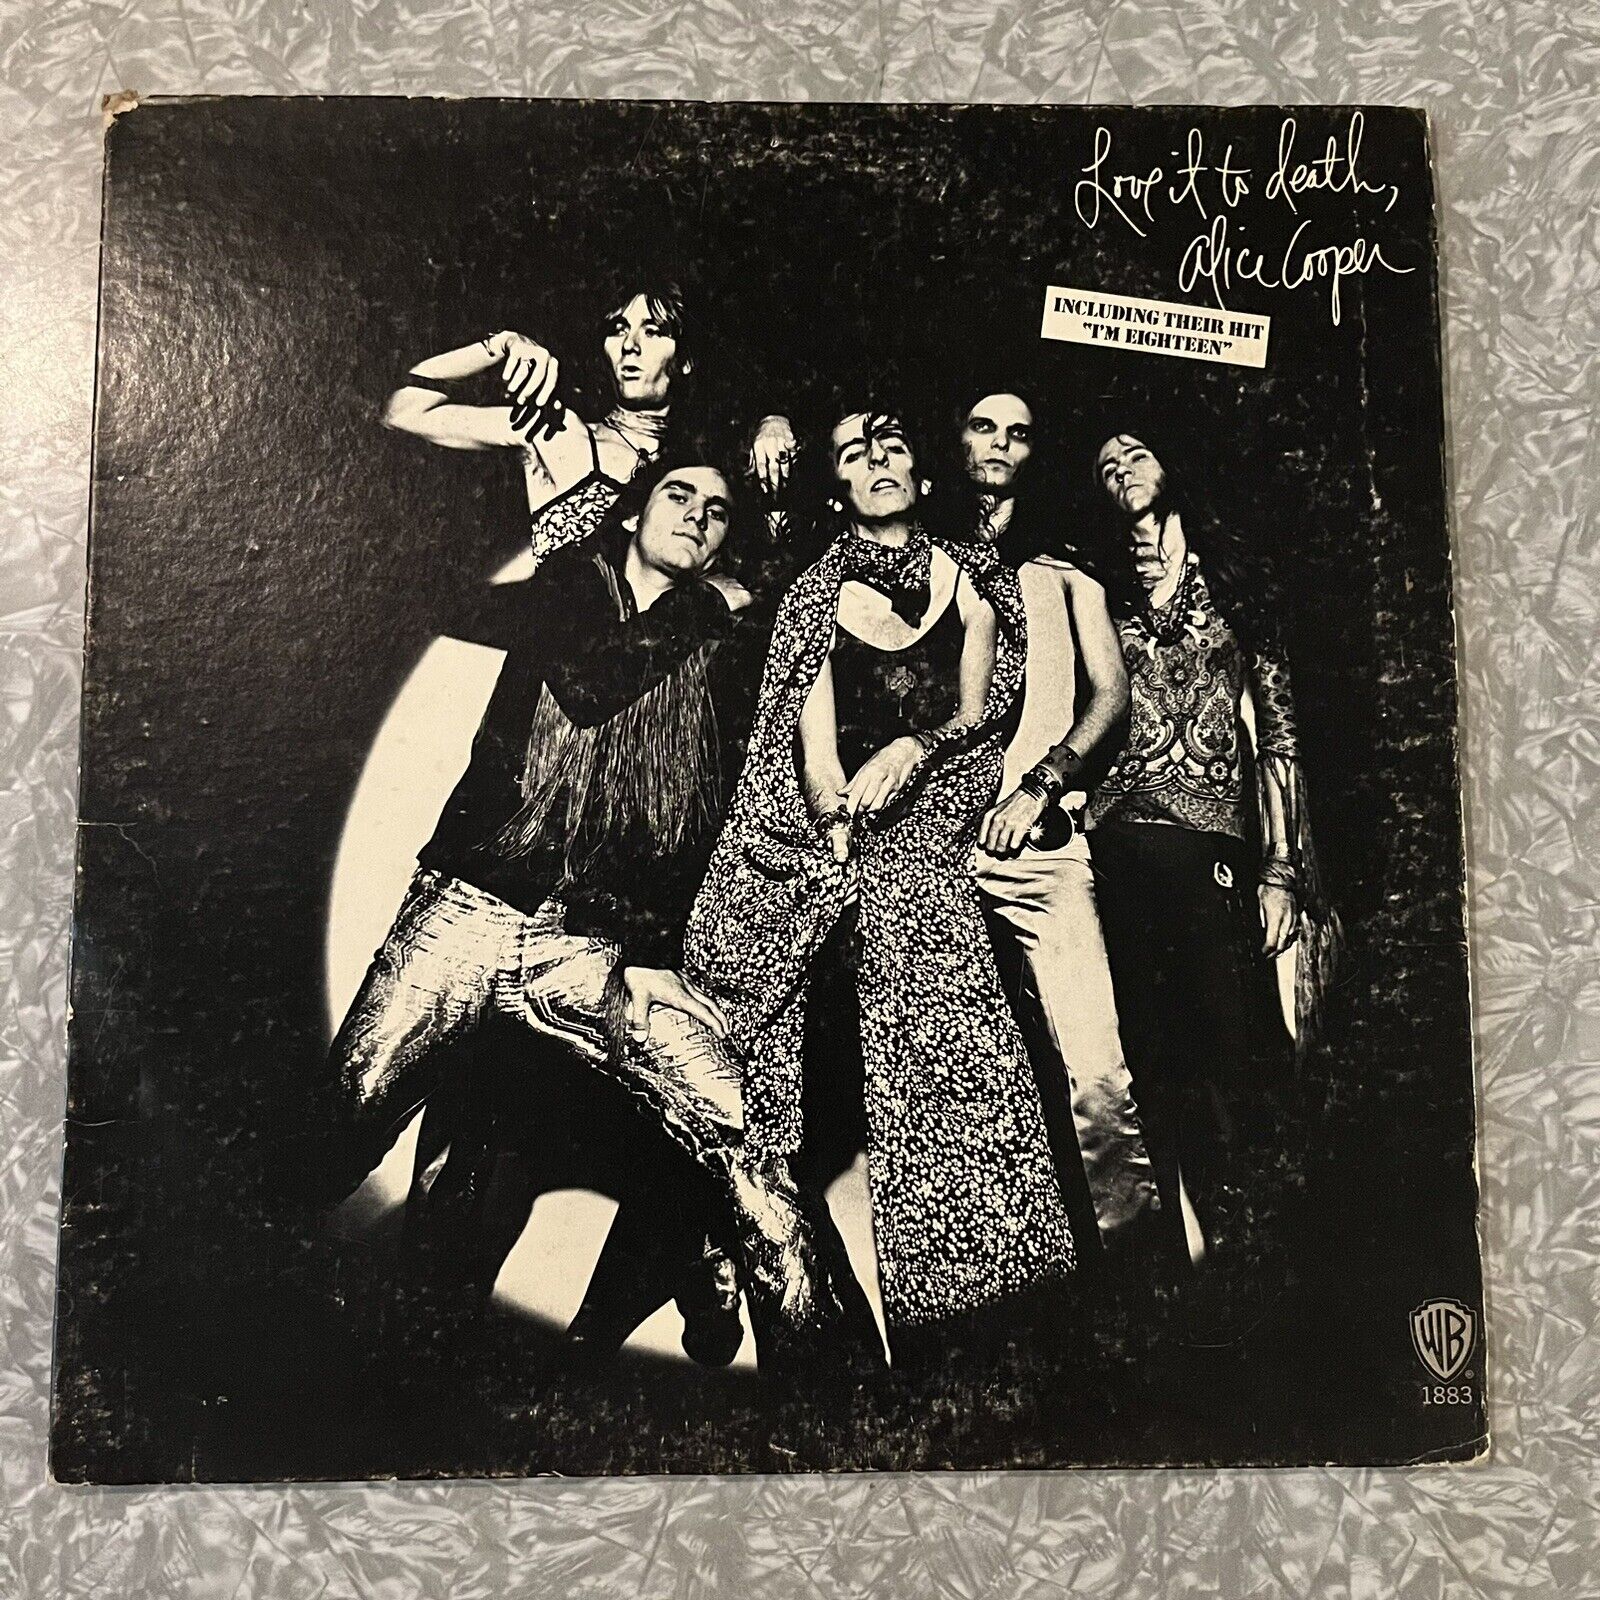 Alice Cooper: Love It To Death (LP, 1971) UNCENSORED RELEASE: WB: Thumb: VG+